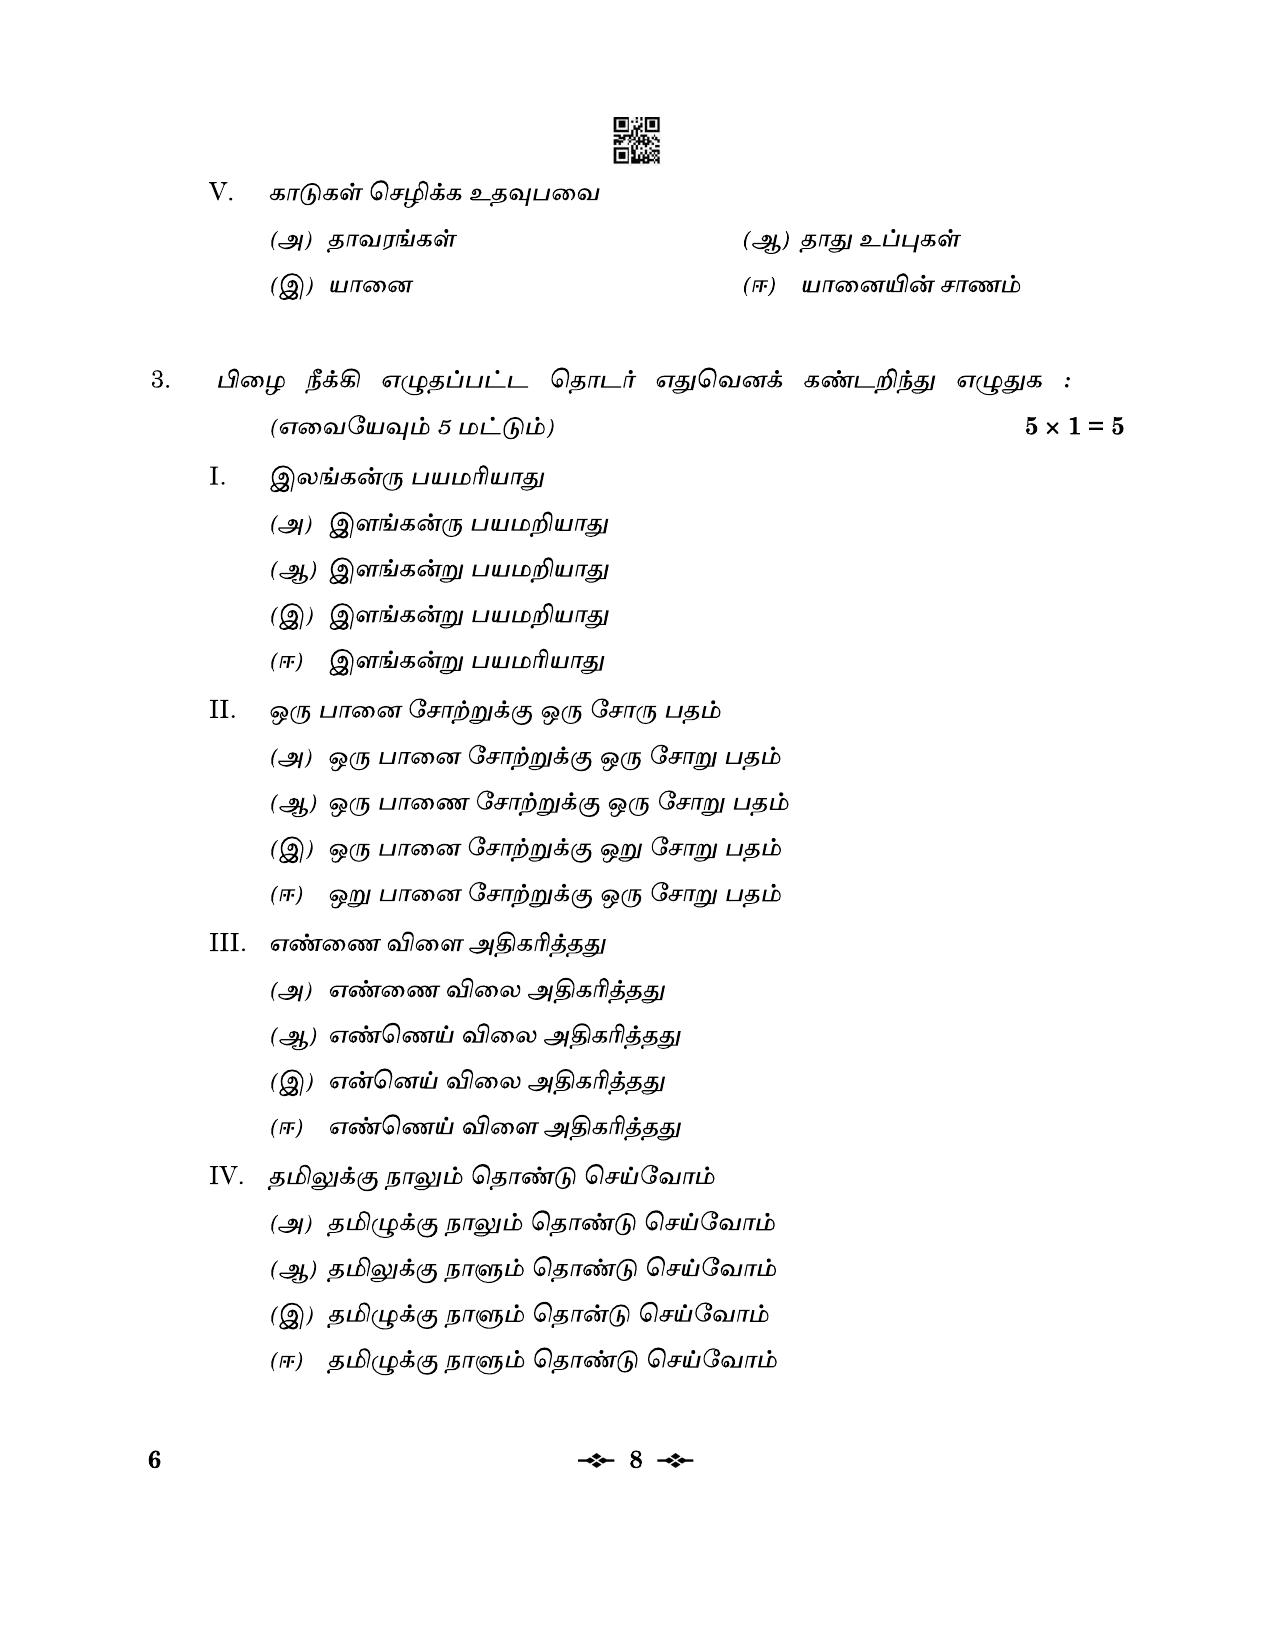 CBSE Class 12 6_Tamil 2023 Question Paper - Page 8